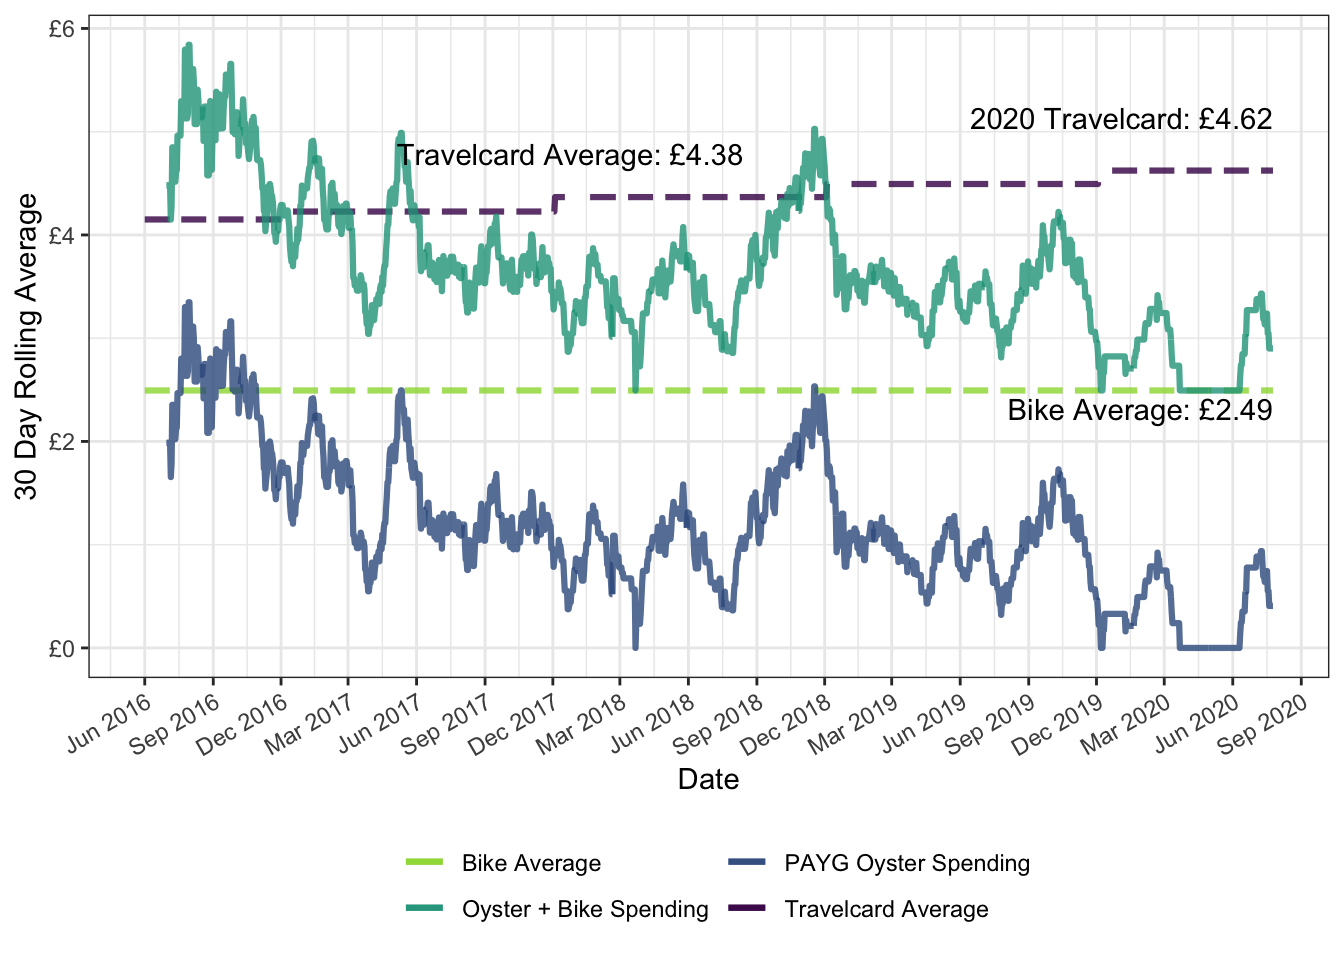 Time series of spending on pay-as-you-go Oyster and cycling, monthly travel card